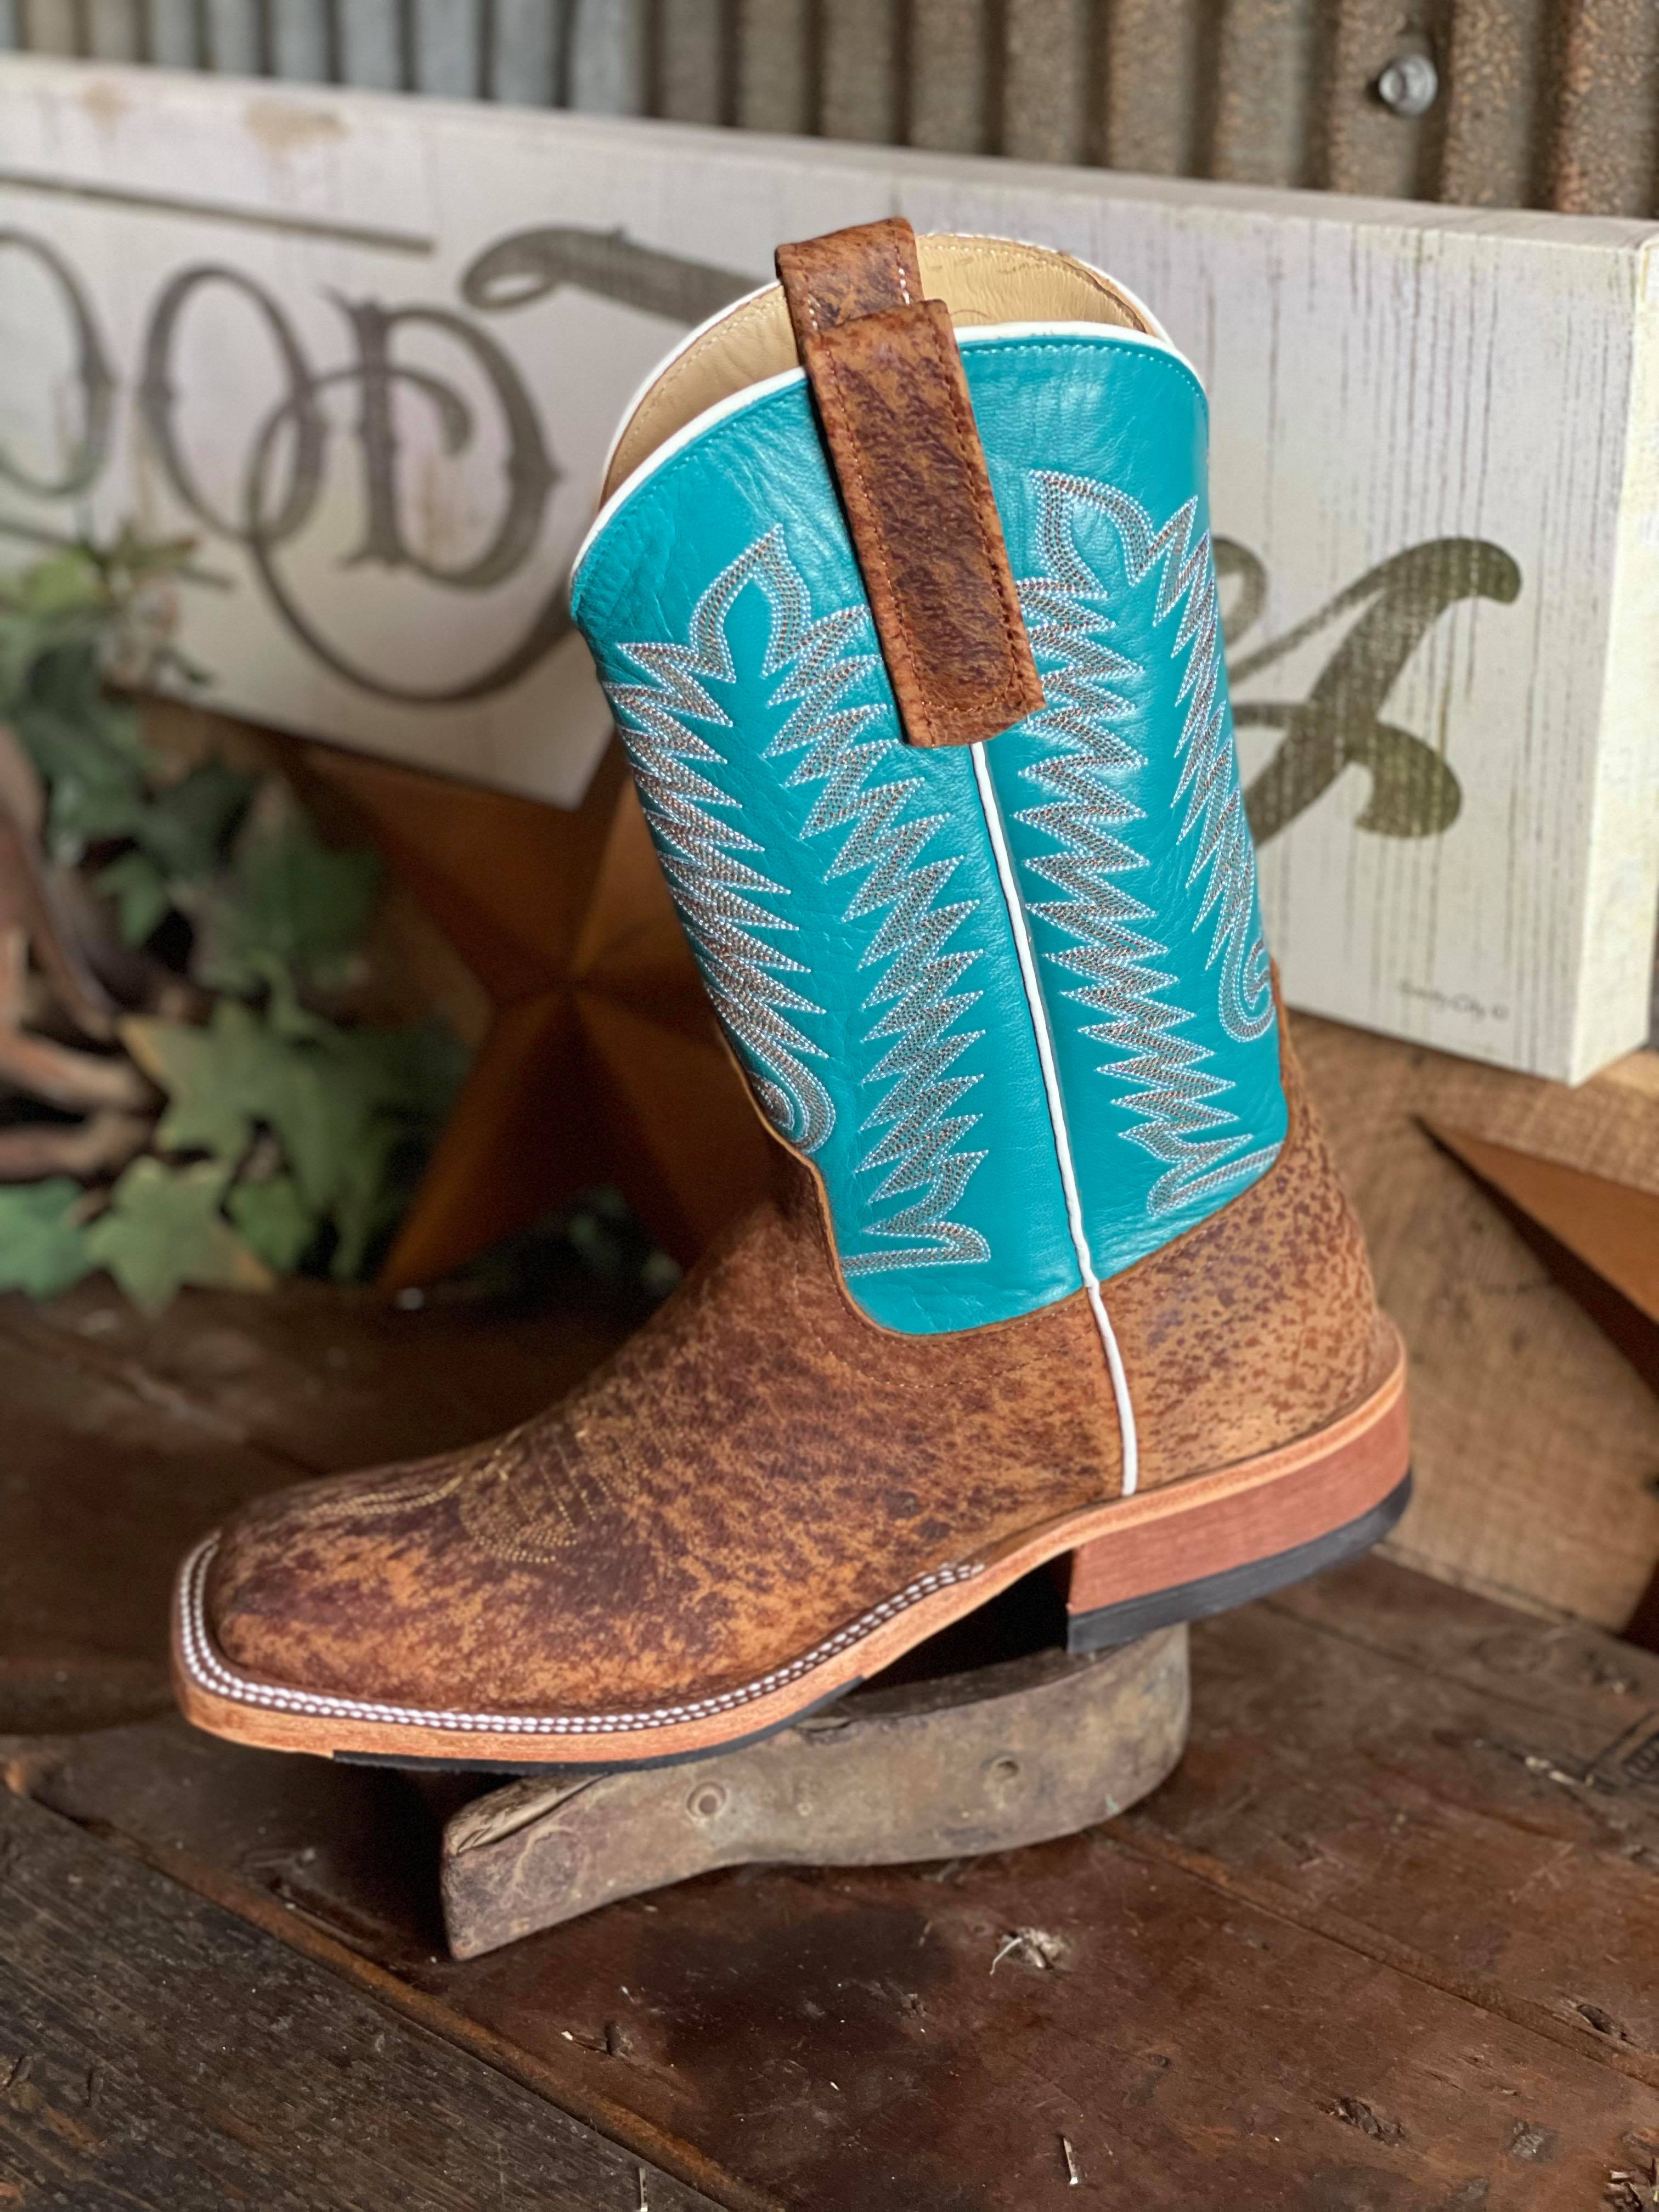 AB Women's Autumn Teal Kid Tag Boar Boots-Women's Boots-Anderson Bean-Lucky J Boots & More, Women's, Men's, & Kids Western Store Located in Carthage, MO